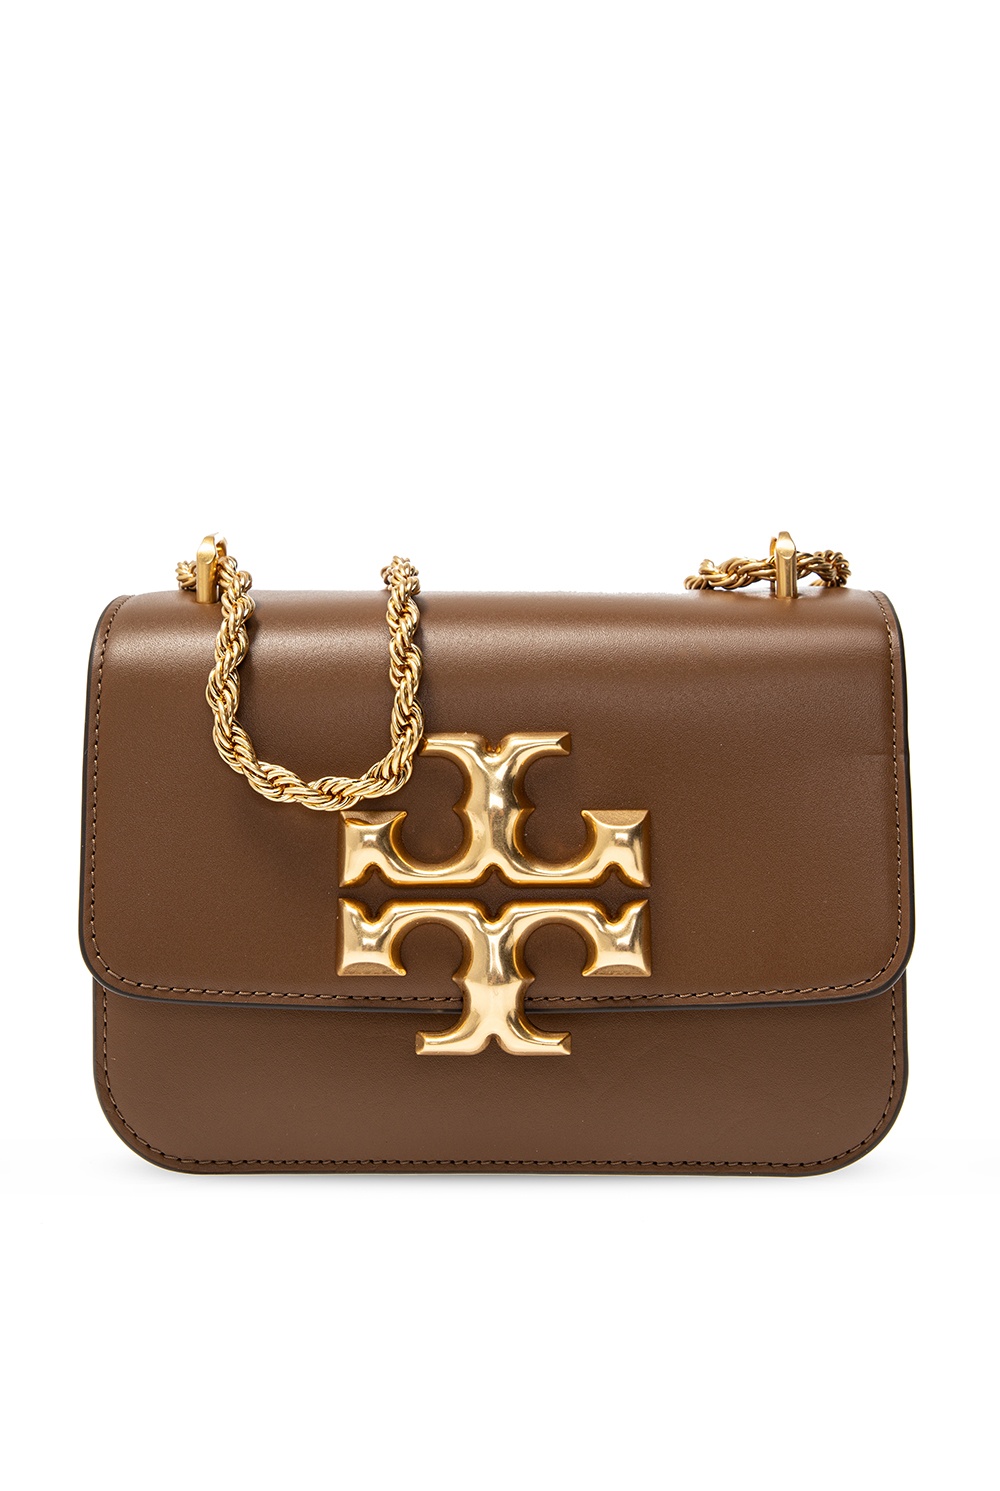 Discover 84+ Images of the Tory Burch Eleanor Bag in Black ...